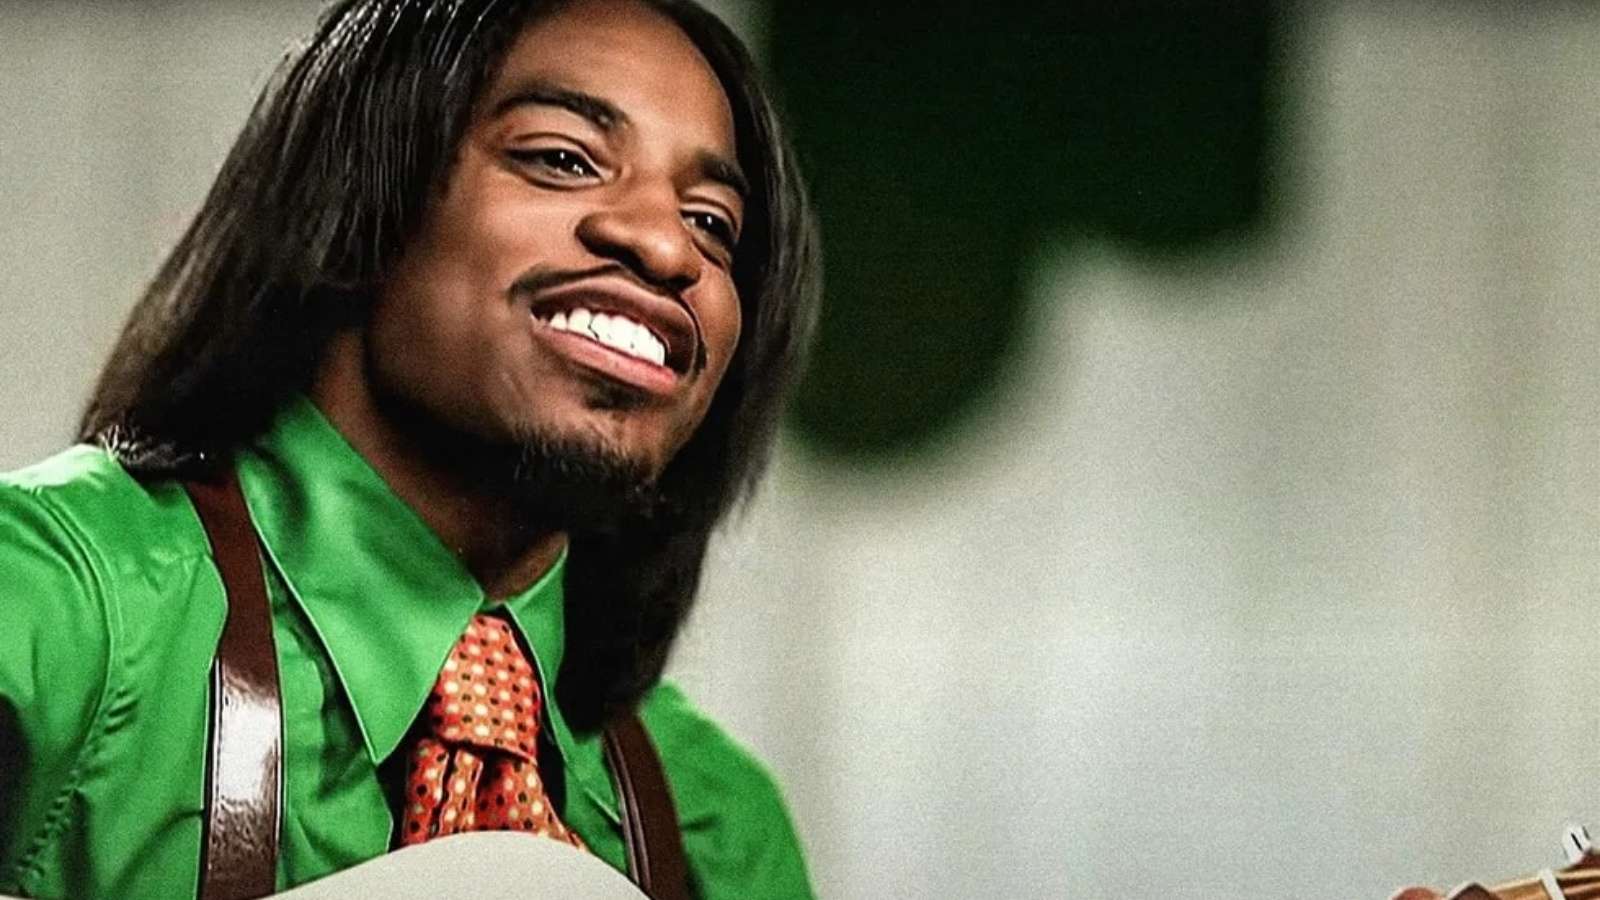 André 3000 in a green button up shirt and suspenders playing a guitar